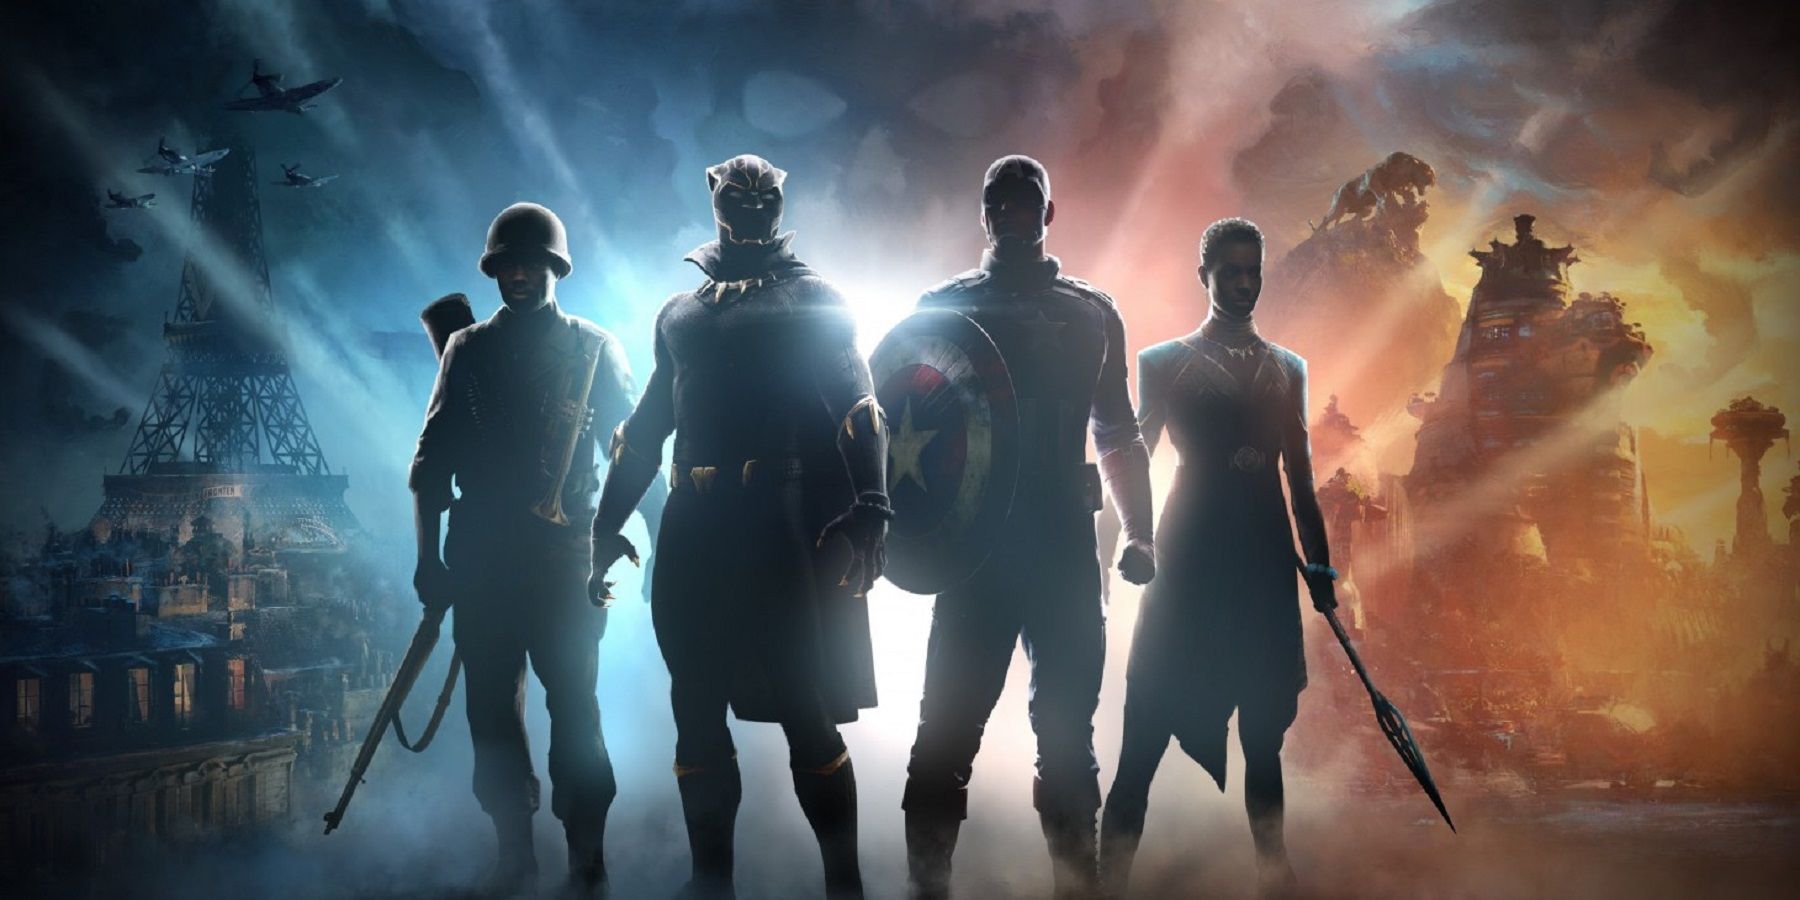 Skydance confirms its new game in partnership with Marvel stars Captain America and Black Panther.